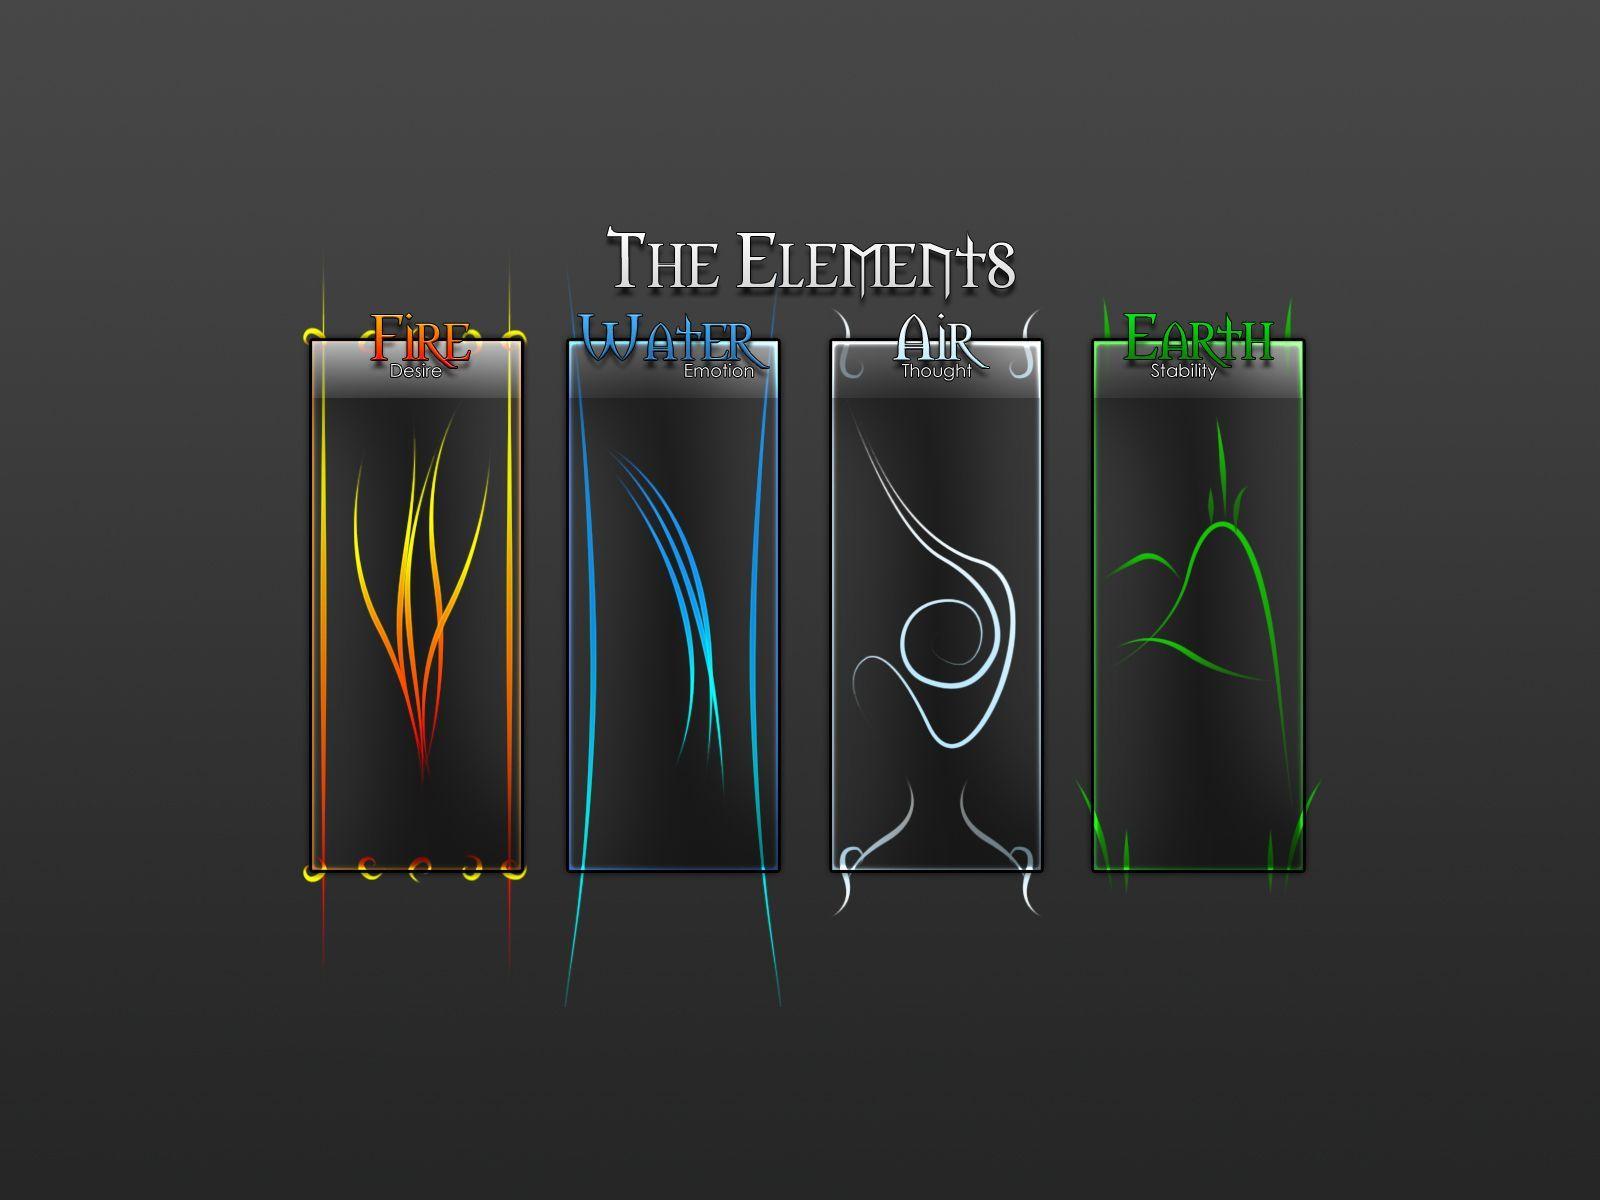 This The Four Elements wallpaper is suitable for use on your Desktop